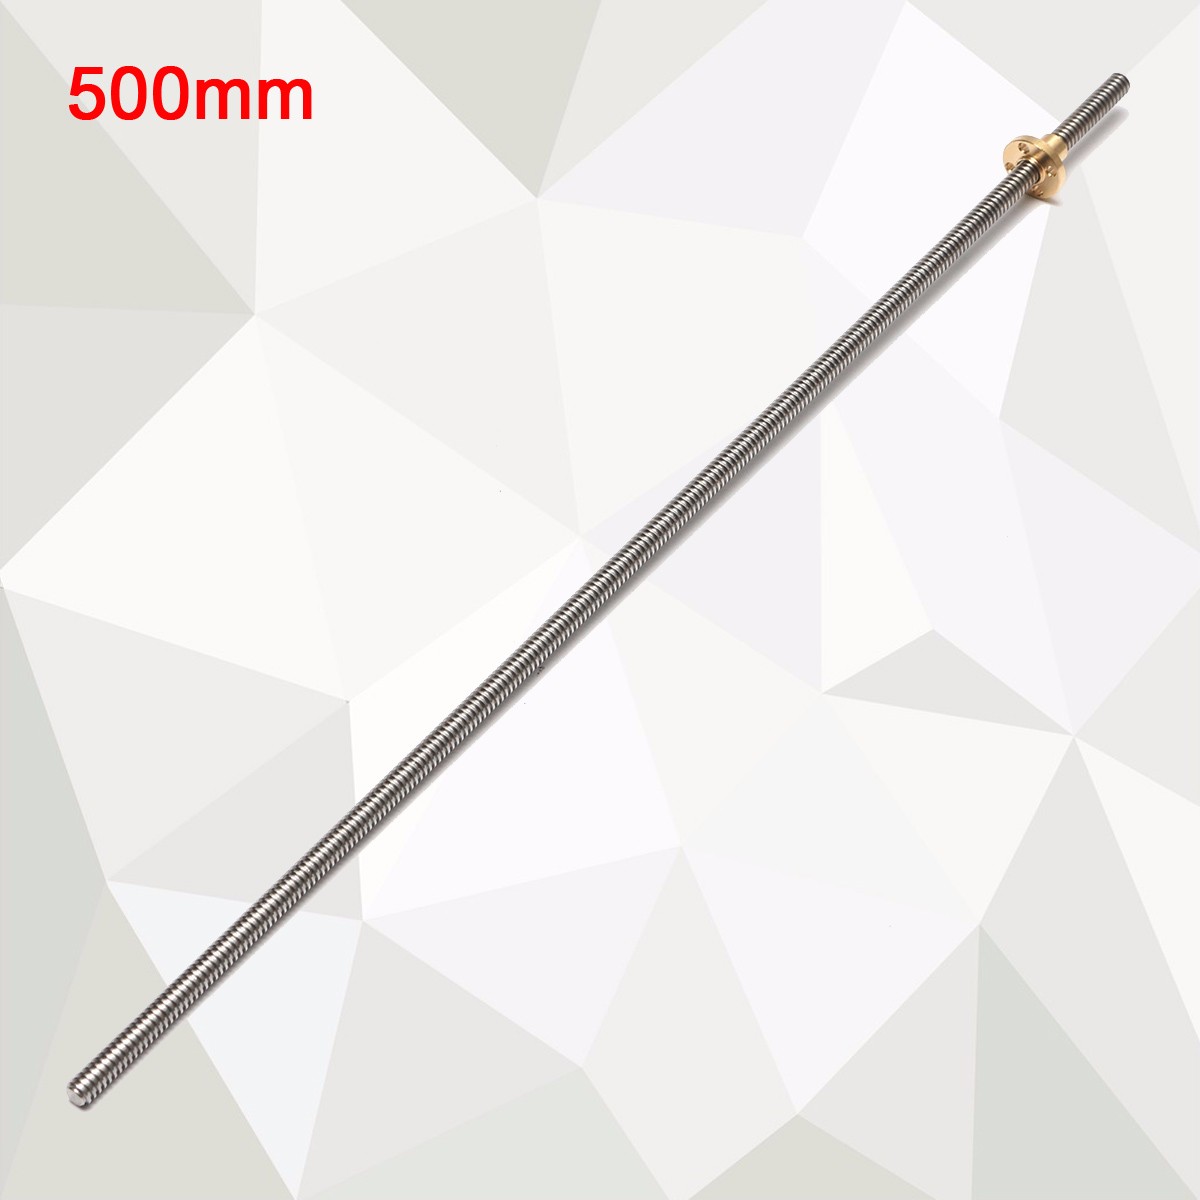 8mm 300/400/500/600mm Lead 2mm Stainless Steel Lead Screw + T8 Nut For CNC 3D Printer Reprap 13